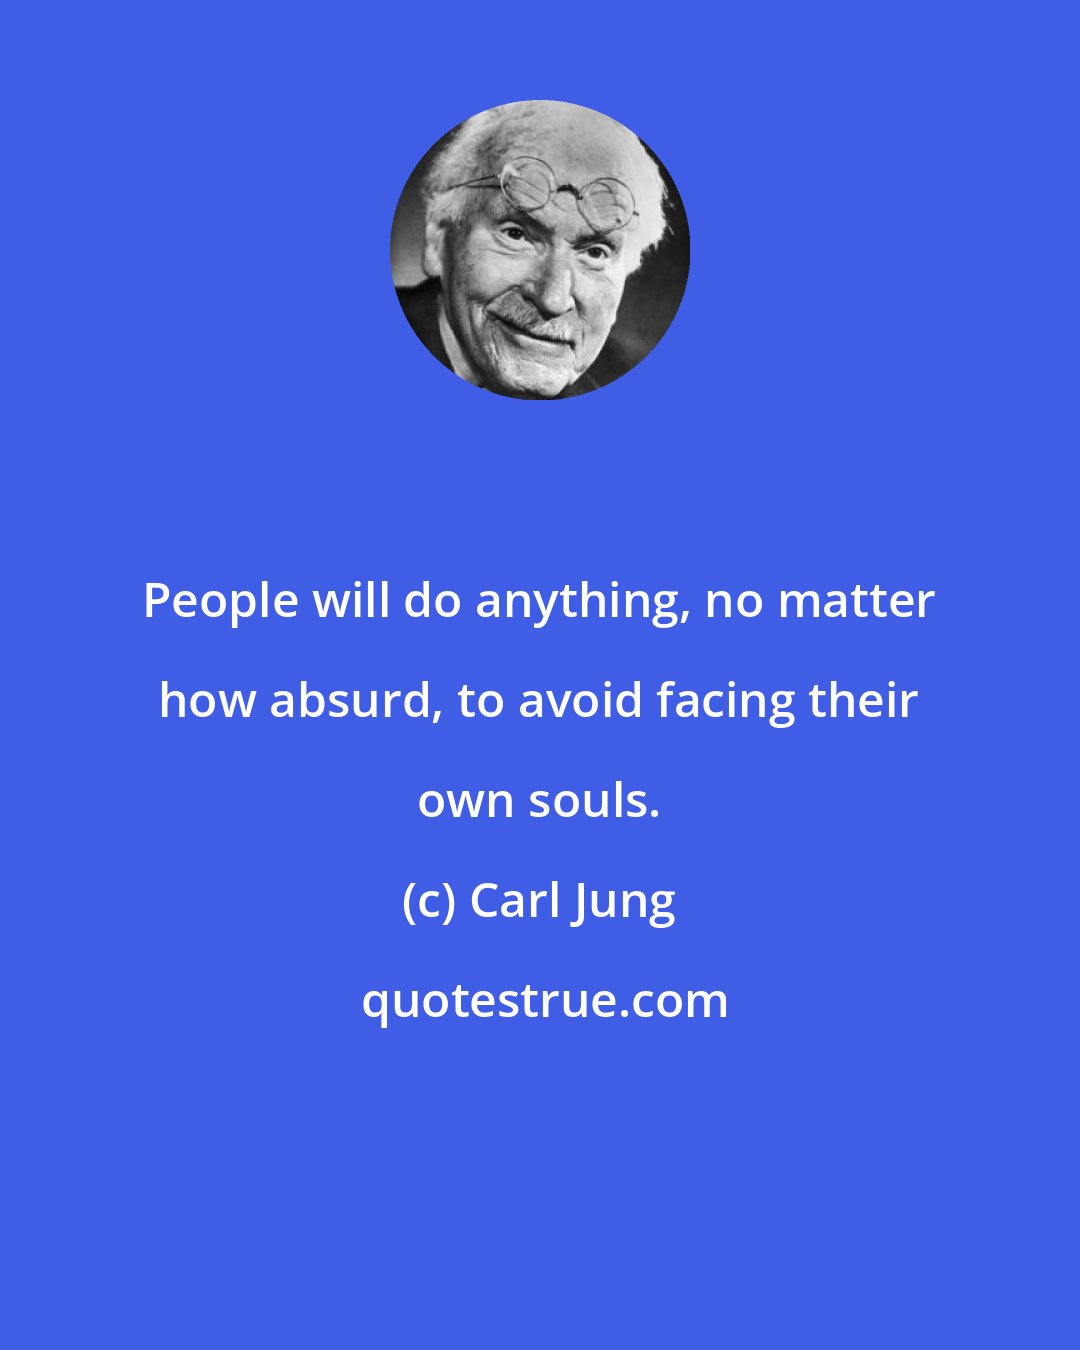 Carl Jung: People will do anything, no matter how absurd, to avoid facing their own souls.